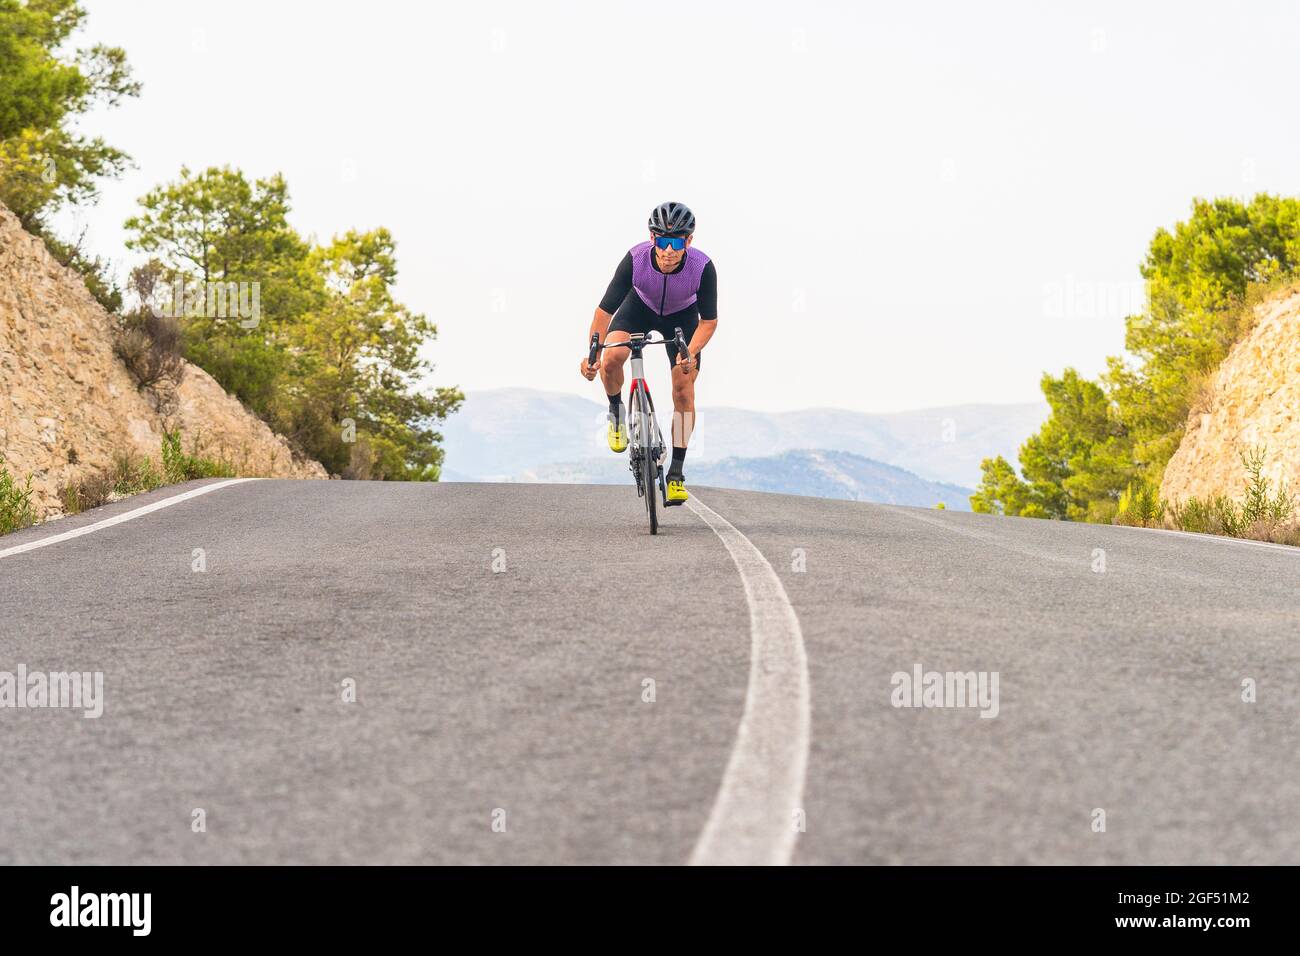 Mature male cyclist riding bicycle on road Stock Photo